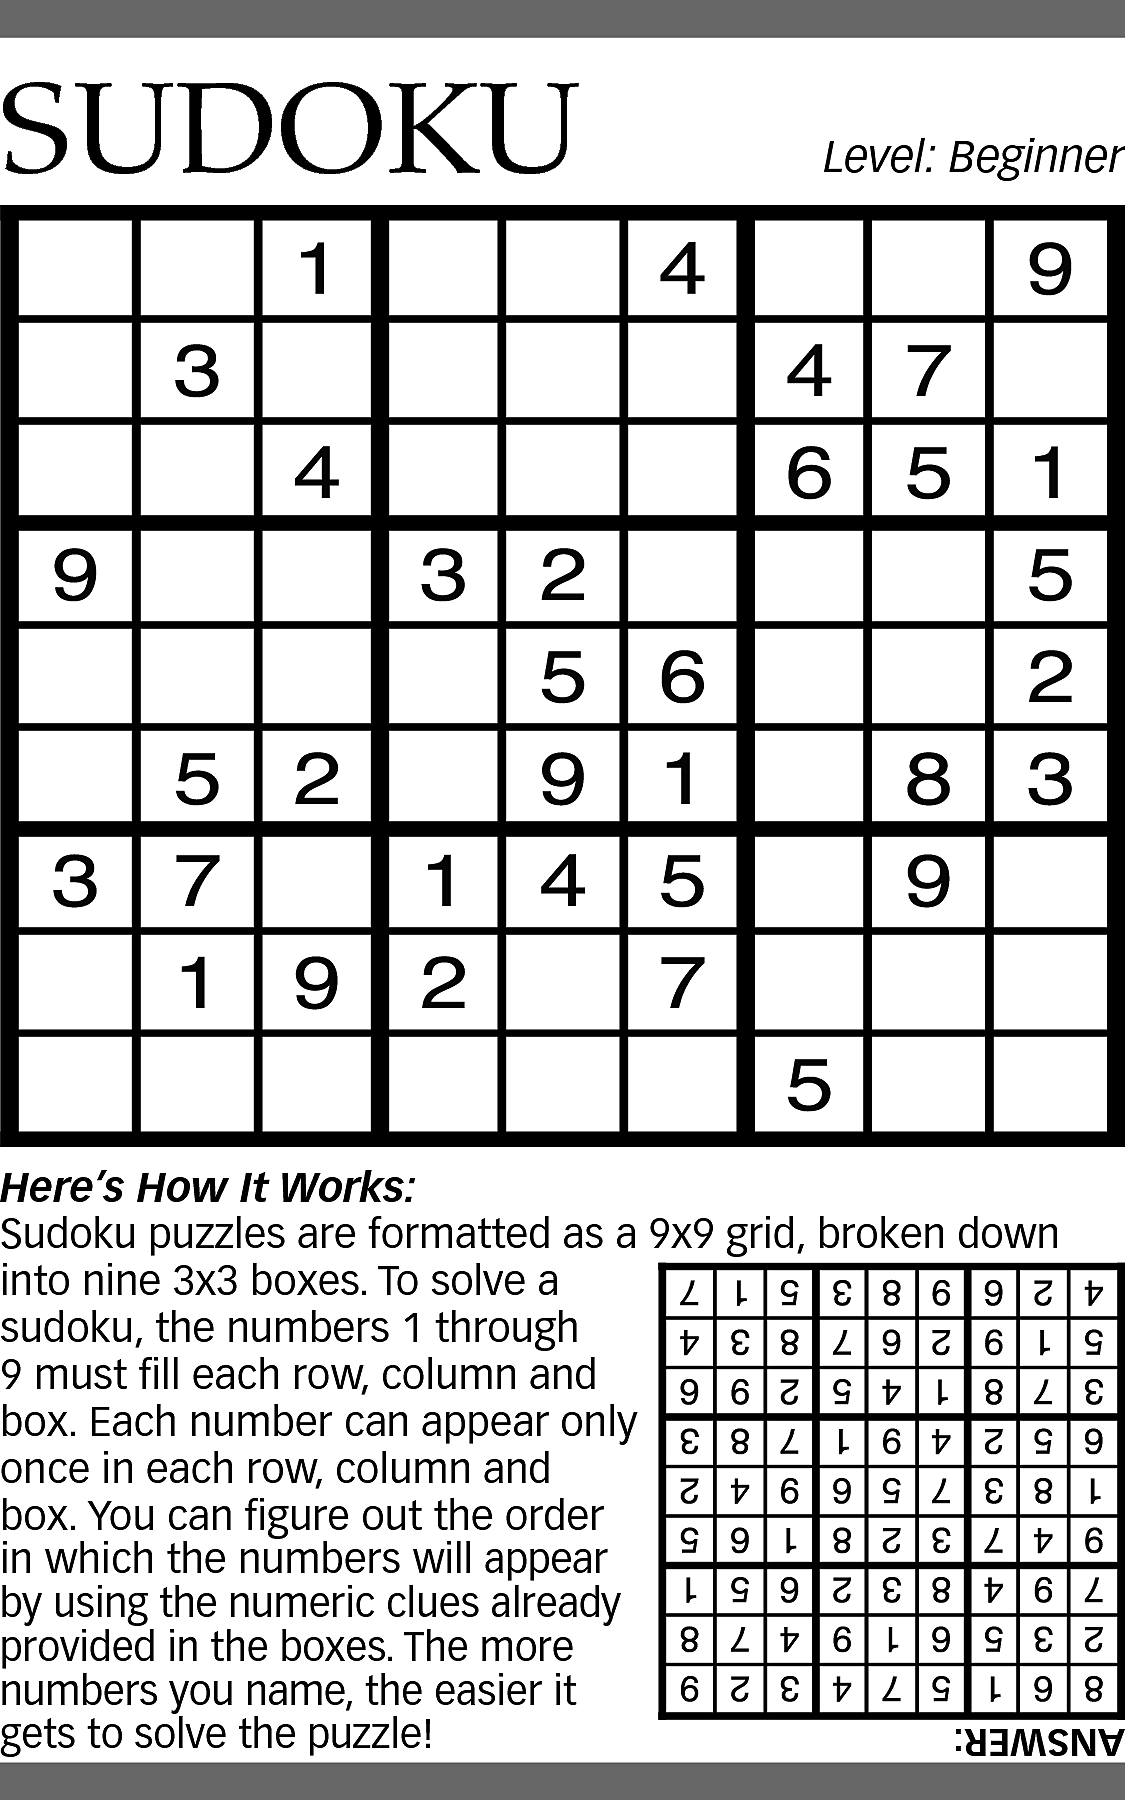 SUDOKU <br> <br>Level: Beginner <br>  SUDOKU    Level: Beginner    Here’s How It Works:  Sudoku puzzles are formatted as a 9x9 grid, broken down  into nine 3x3 boxes. To solve a  sudoku, the numbers 1 through  9 must fill each row, column and  box. Each number can appear only  once in each row, column and  box. You can figure out the order  in which the numbers will appear  by using the numeric clues already  provided in the boxes. The more  numbers you name, the easier it  gets to solve the puzzle!    ANSWER:    